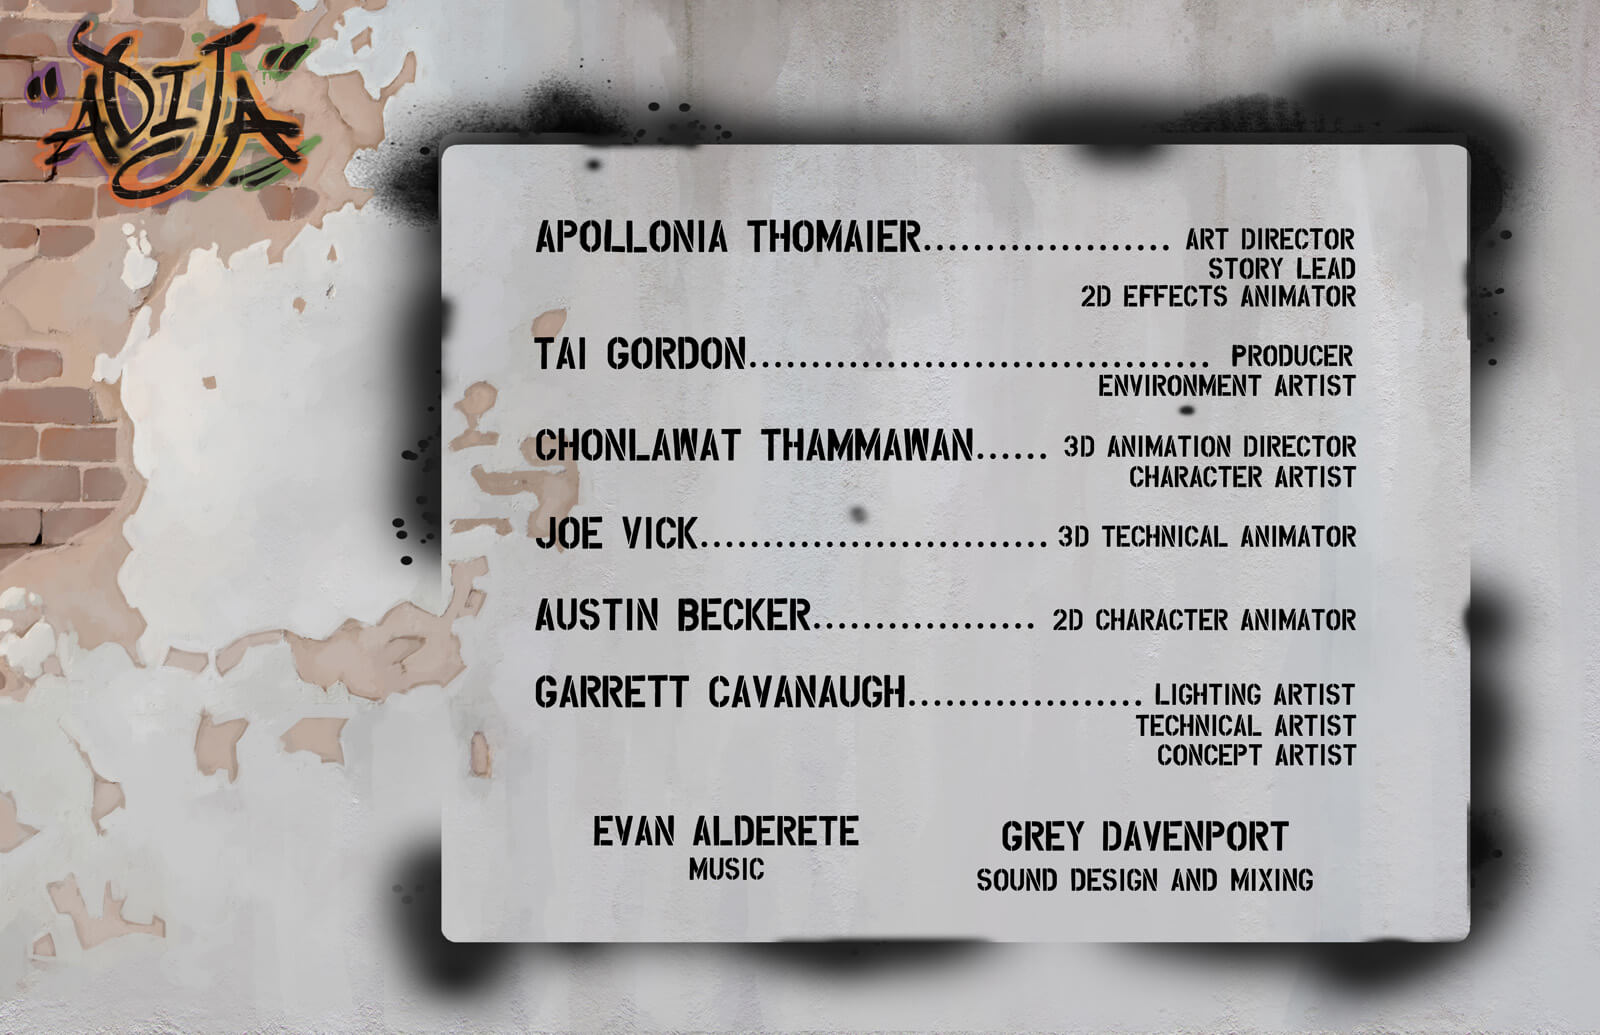 Credits for the film Adija in a stylized format of a spray painted background